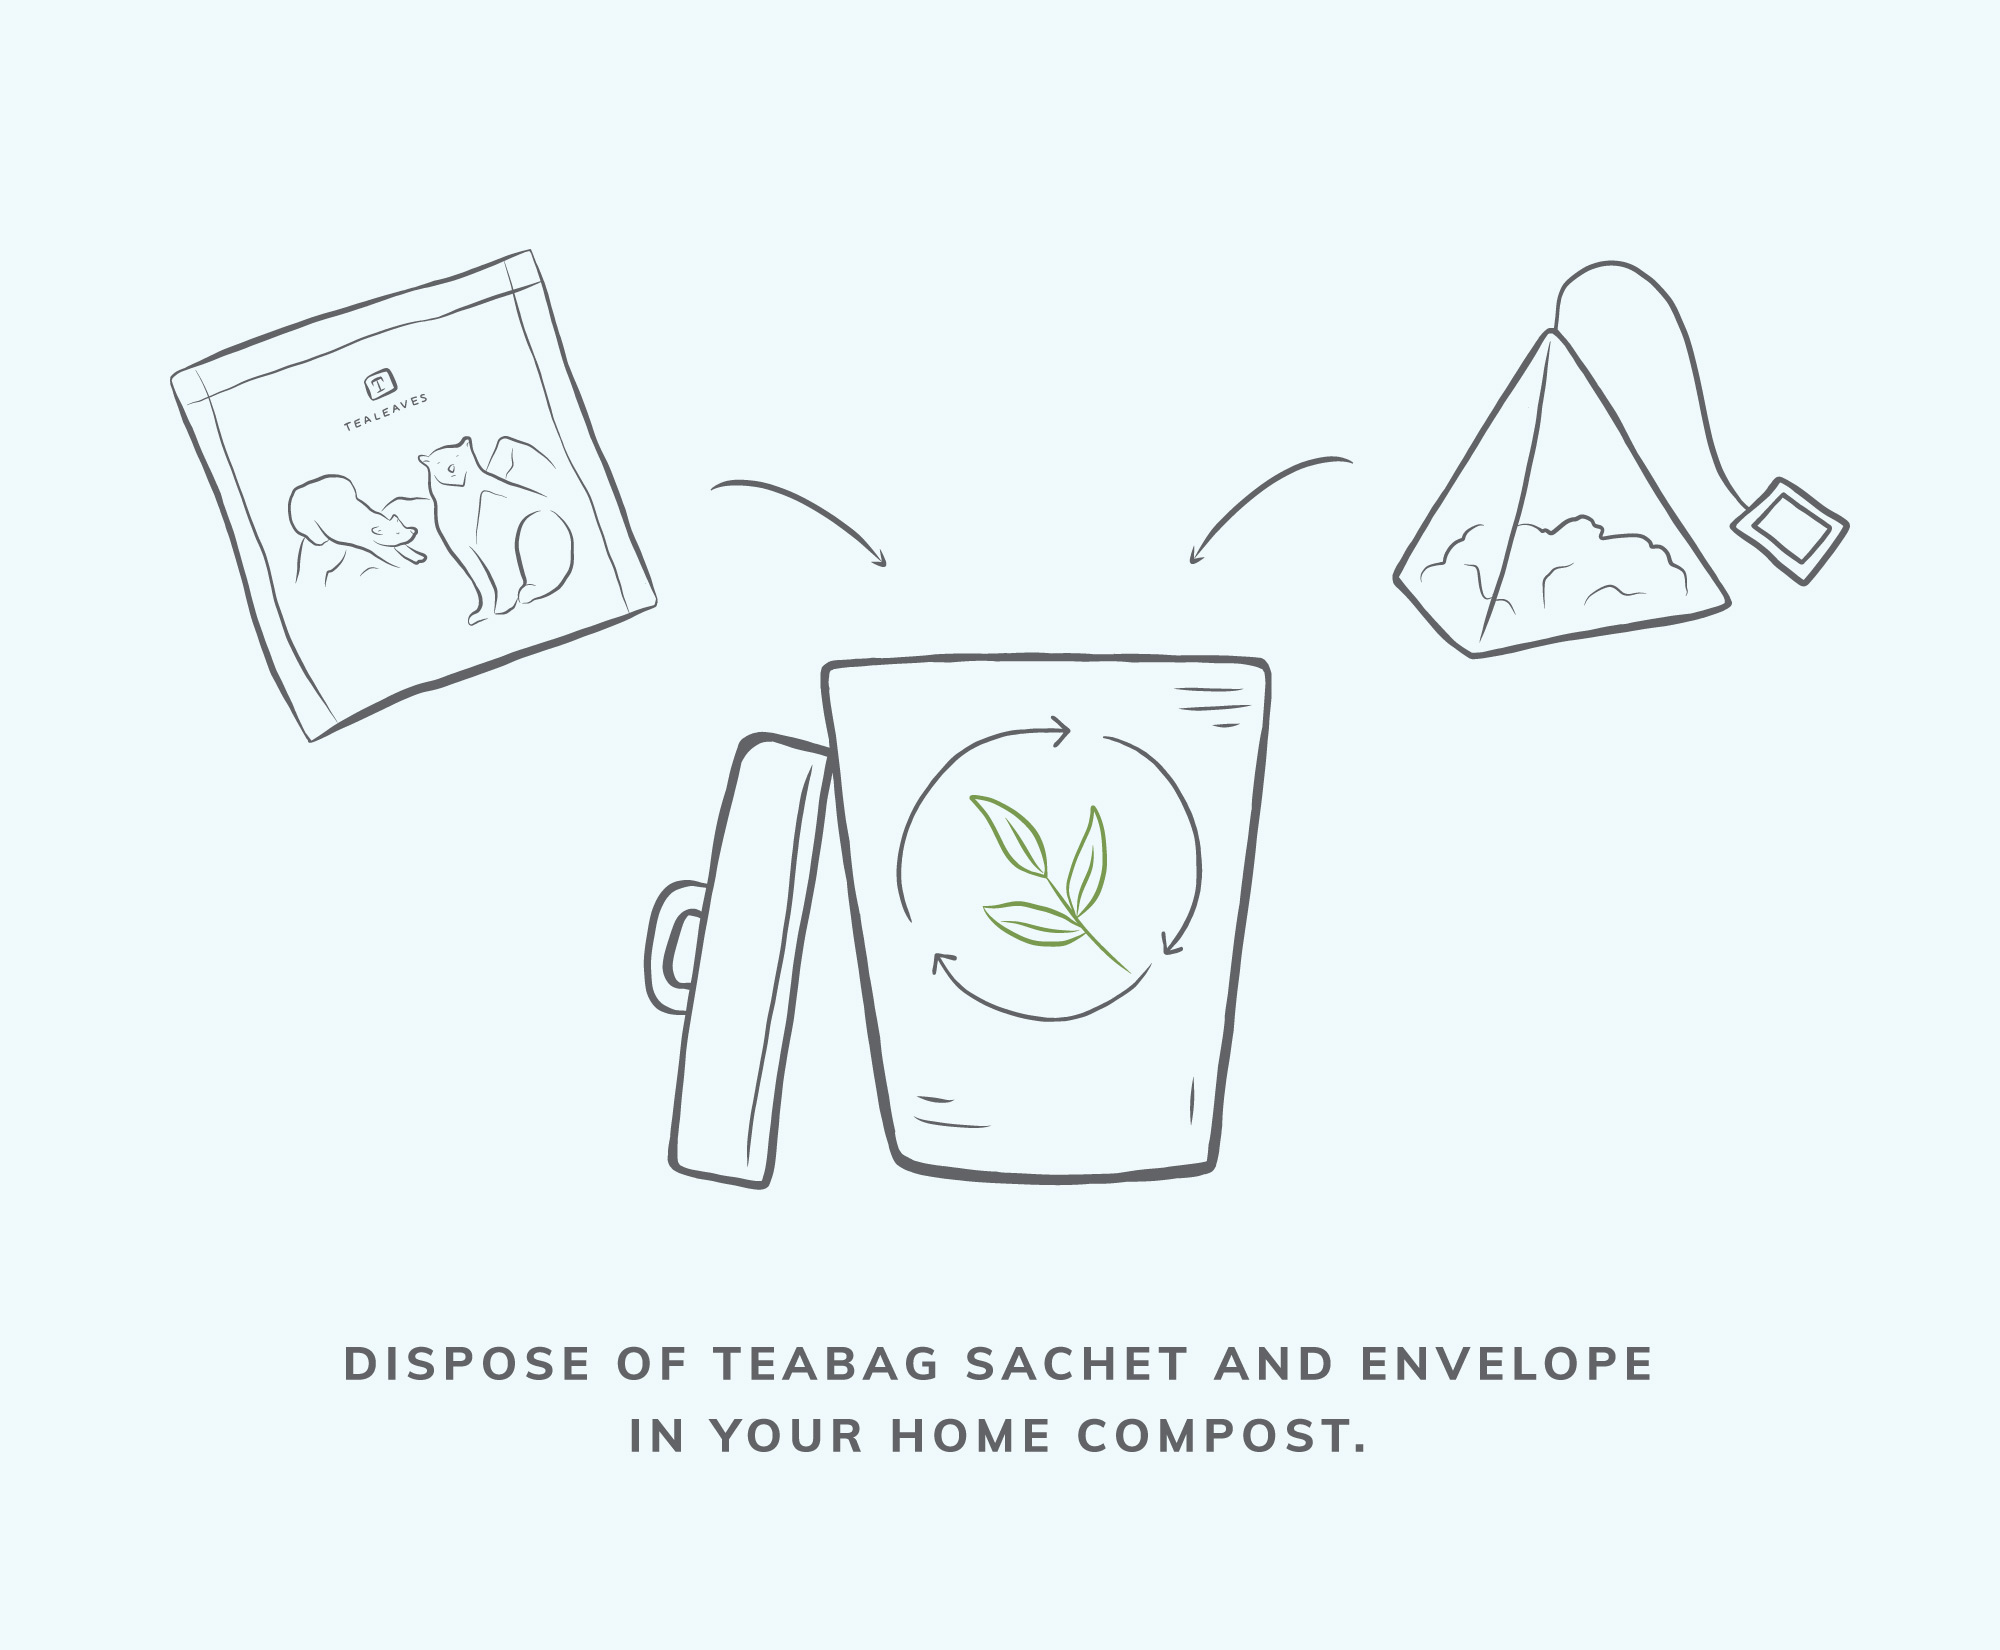 Dispose of teabag sachet and envelope in your home compost.